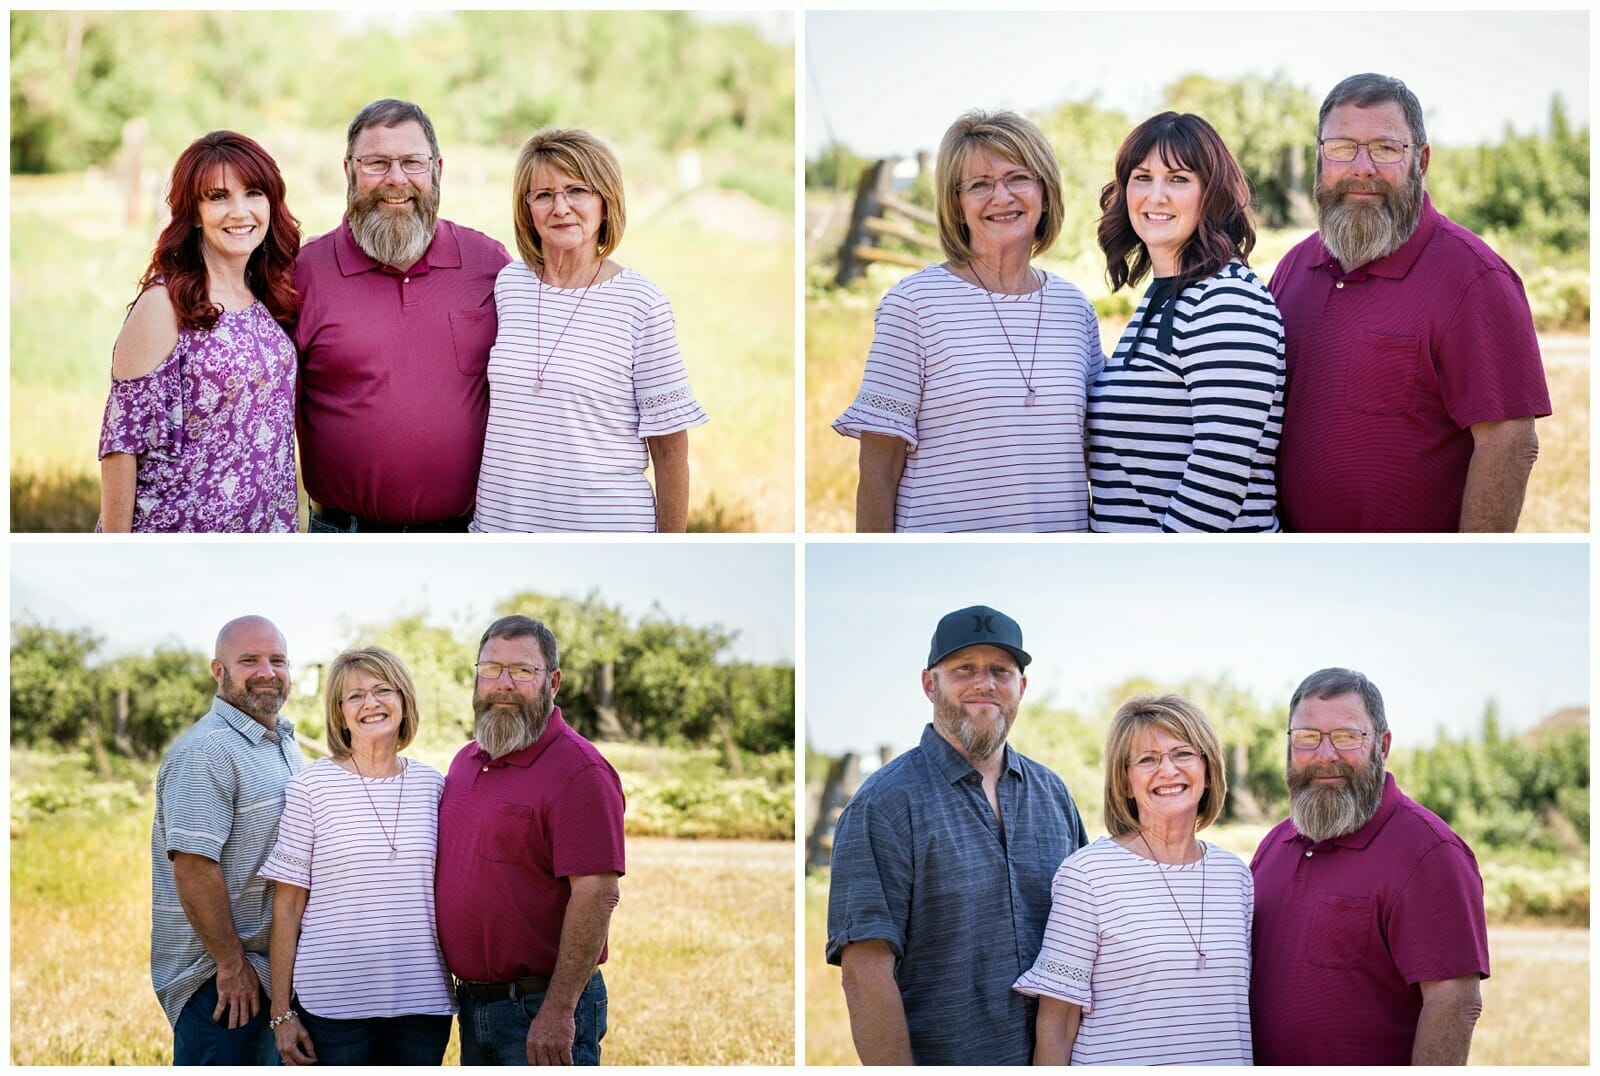 Chrissy Ray Photography - Family Session, Eagle, ID